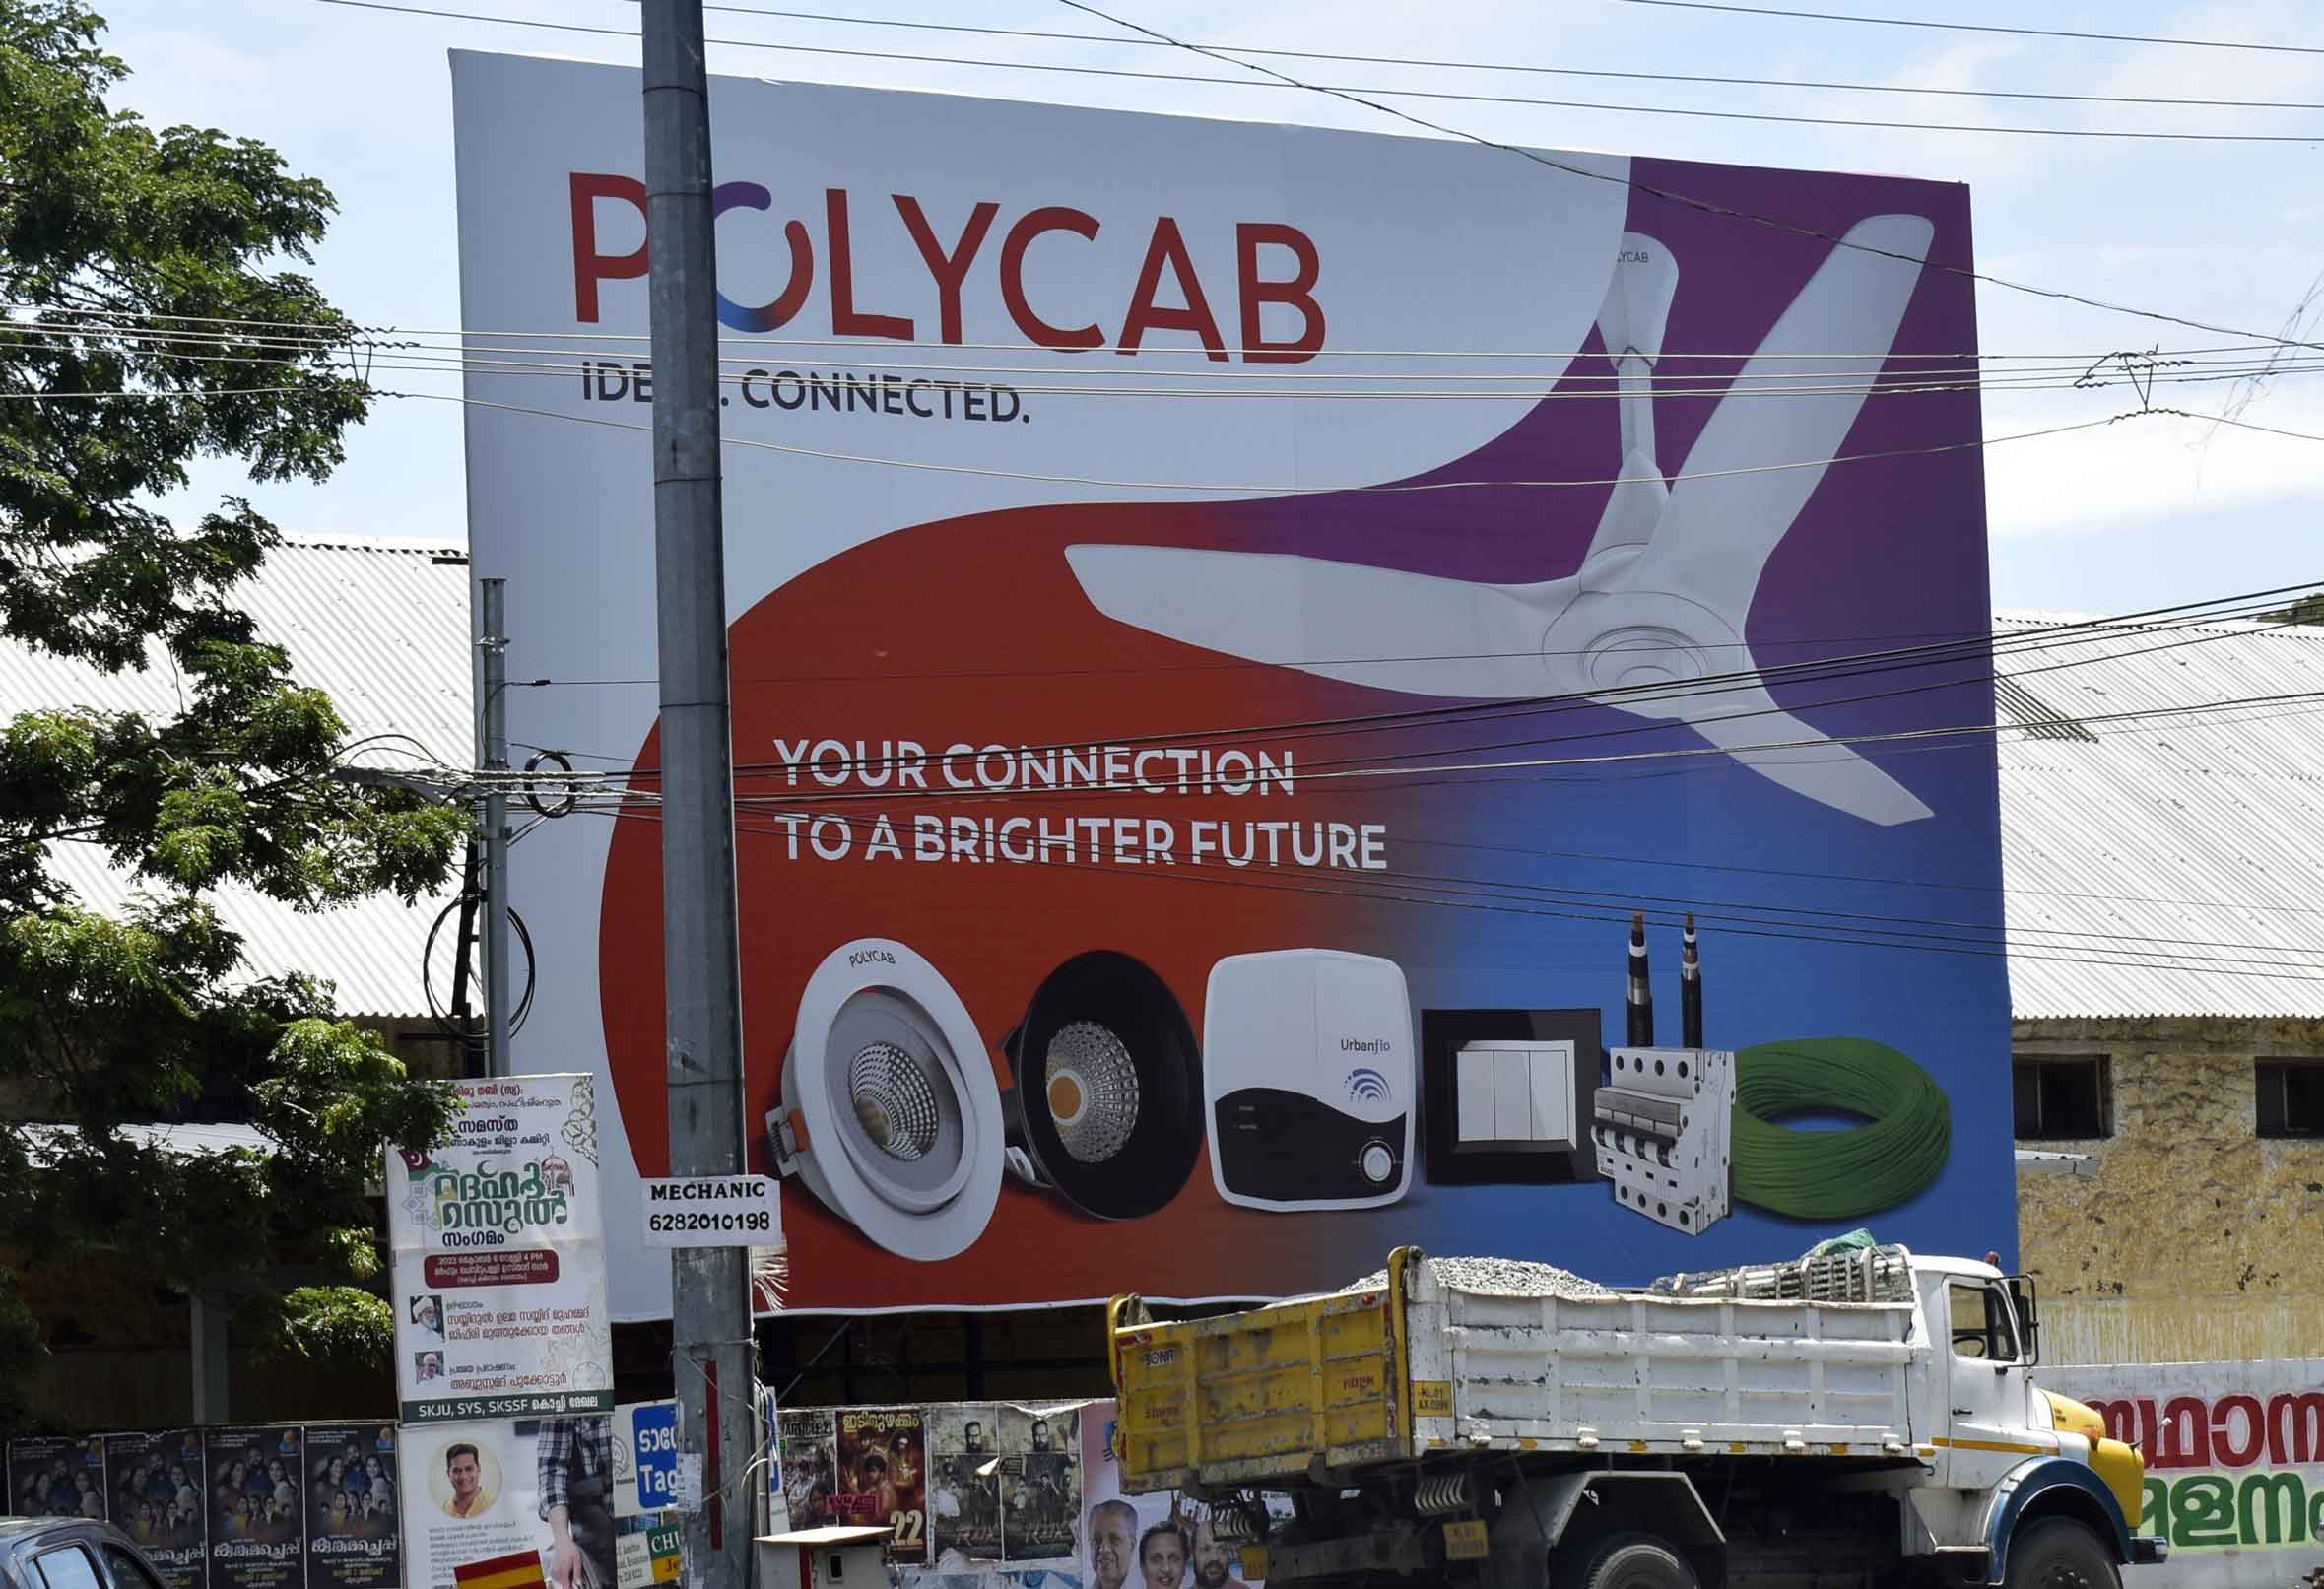 Polycab OOH campaign 